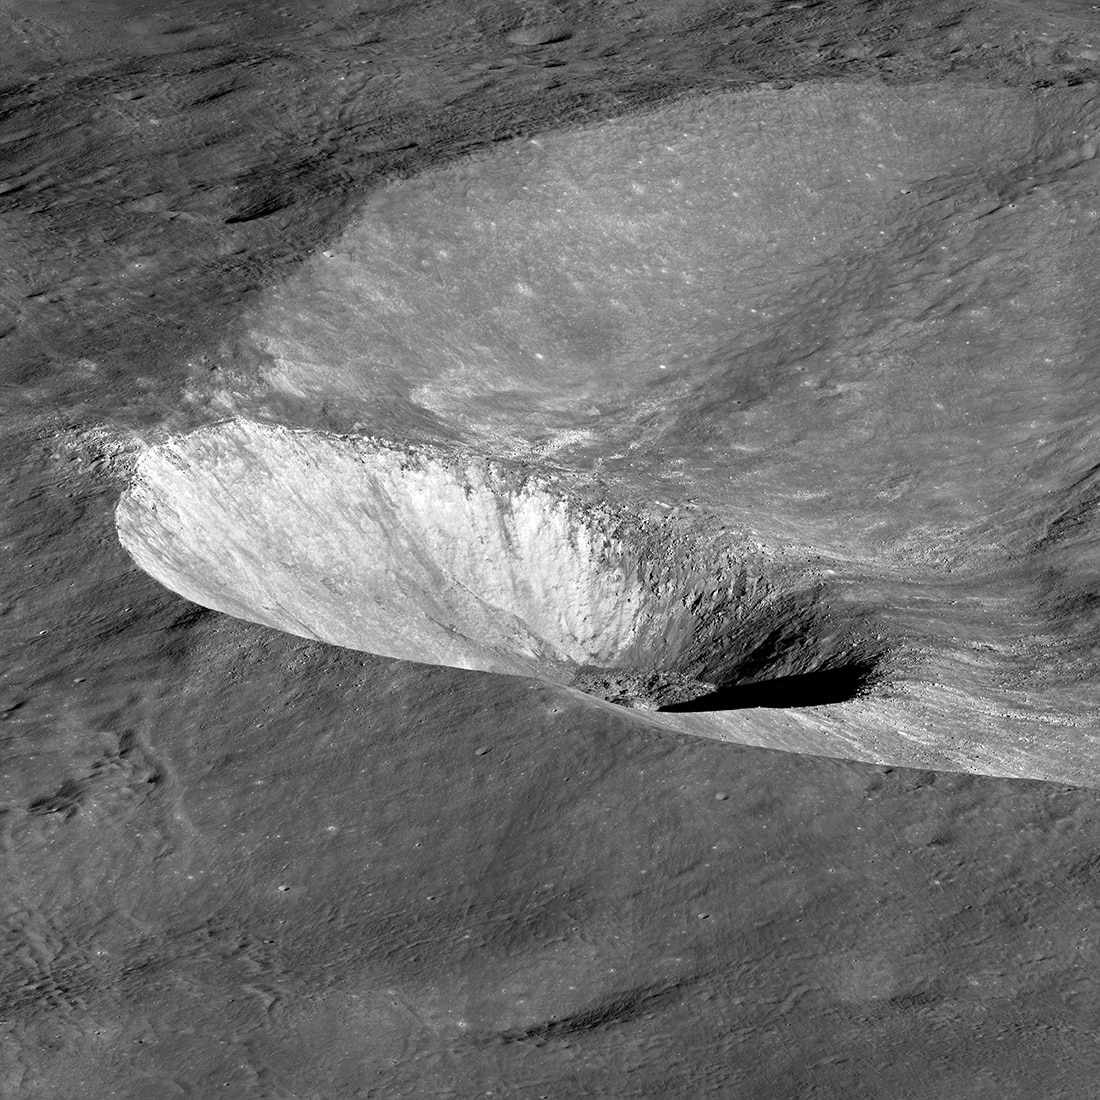 An oblique Lunar Reconnaissance Orbiter view of the lunar crater Hawke, which sits on the rim of the larger crater Grotrian. Credit: NASA/GSFC/Arizona State University